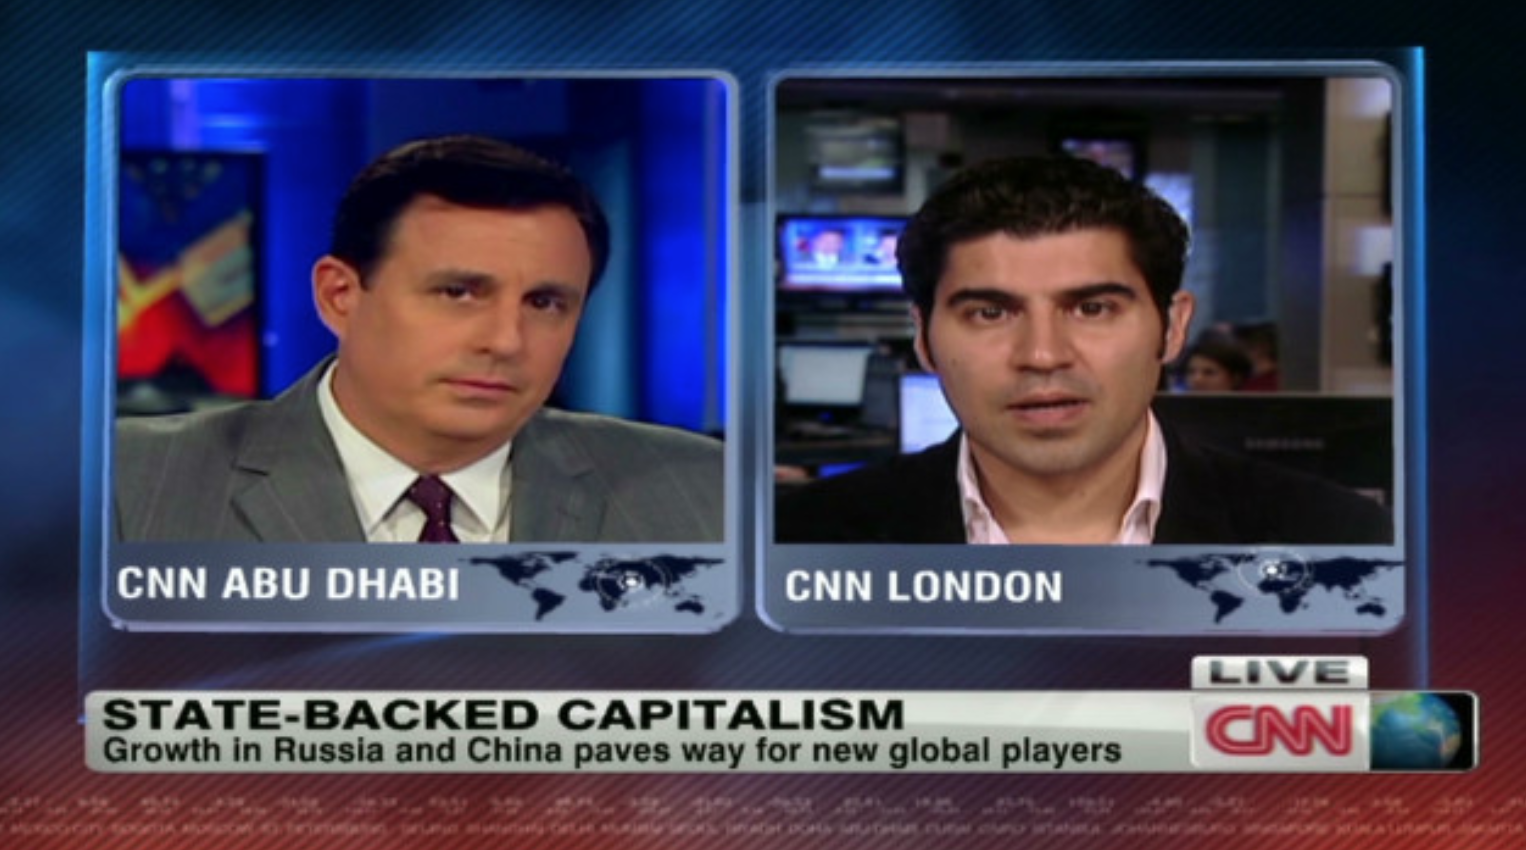 Discussing State-Backed Capitalism on CNN’s Global Exchange